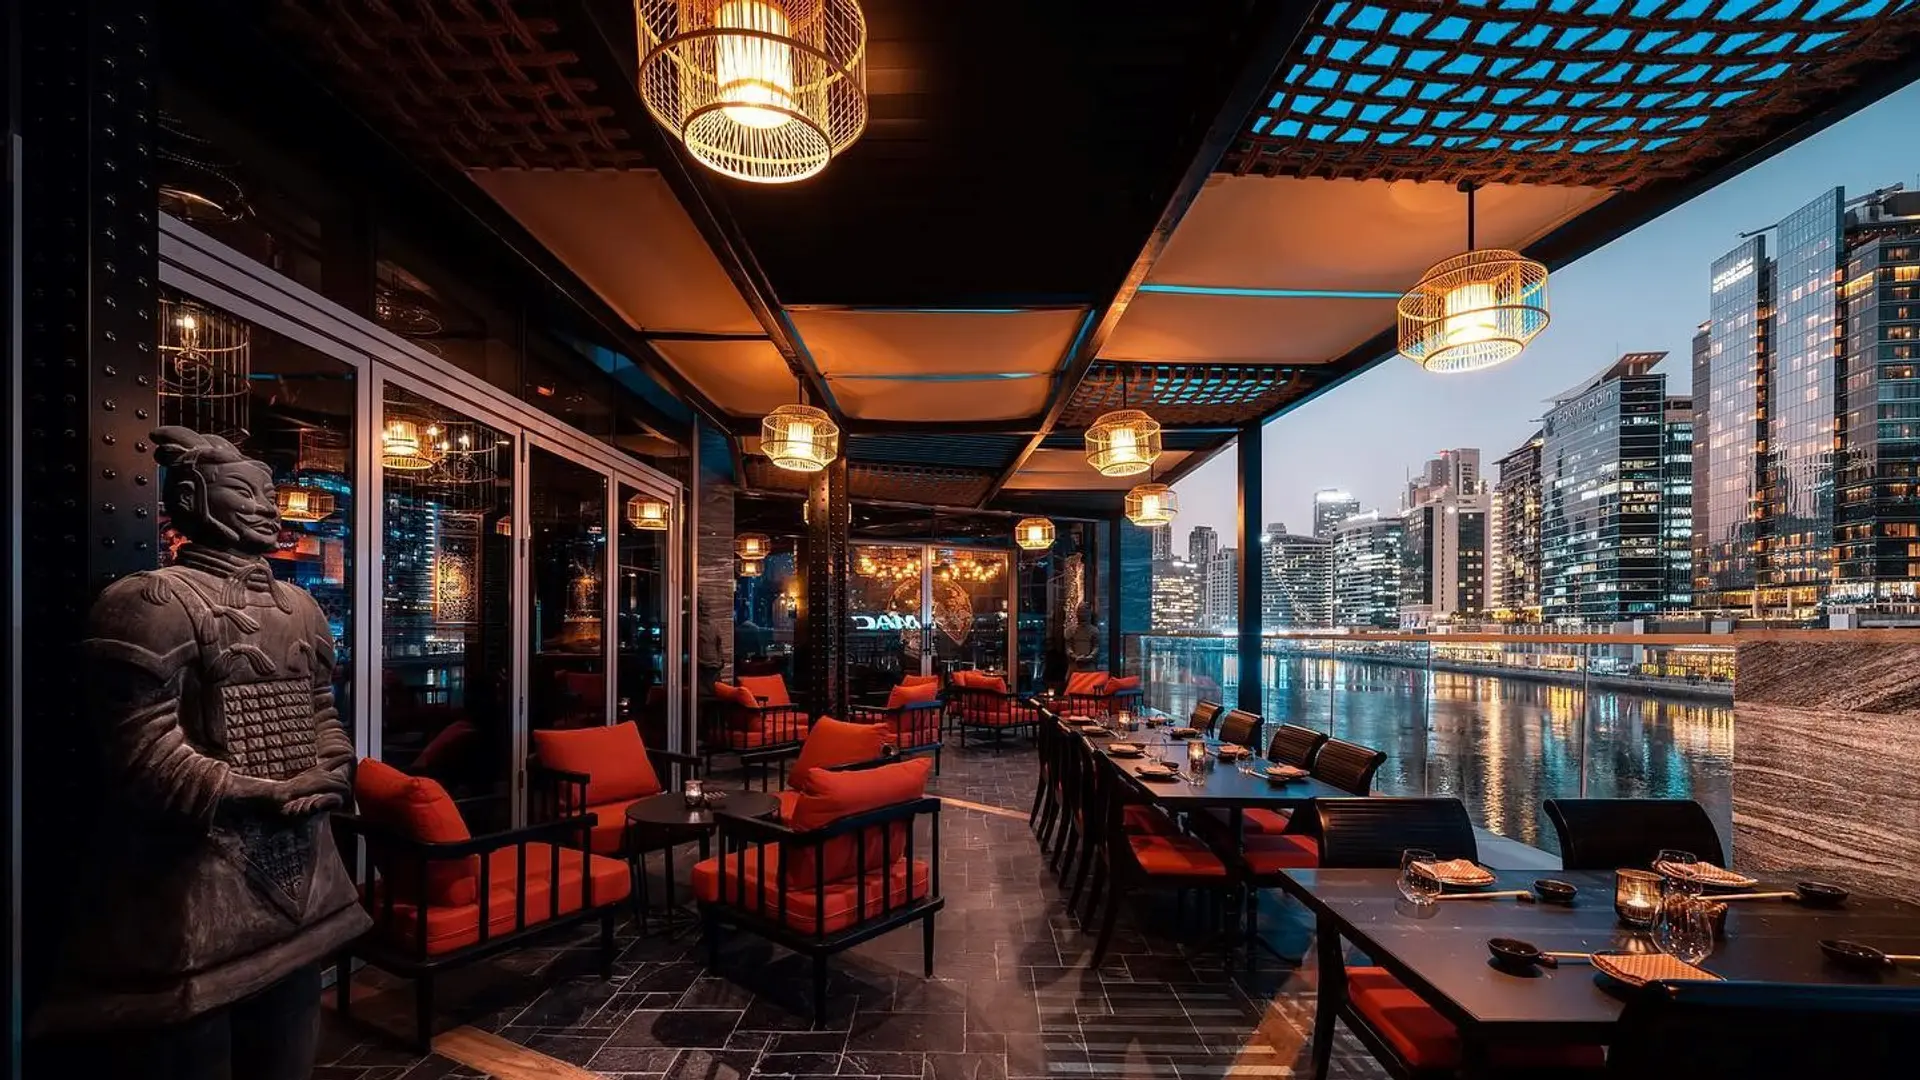 Asia Asia is one of the best rooftop bars in dubai